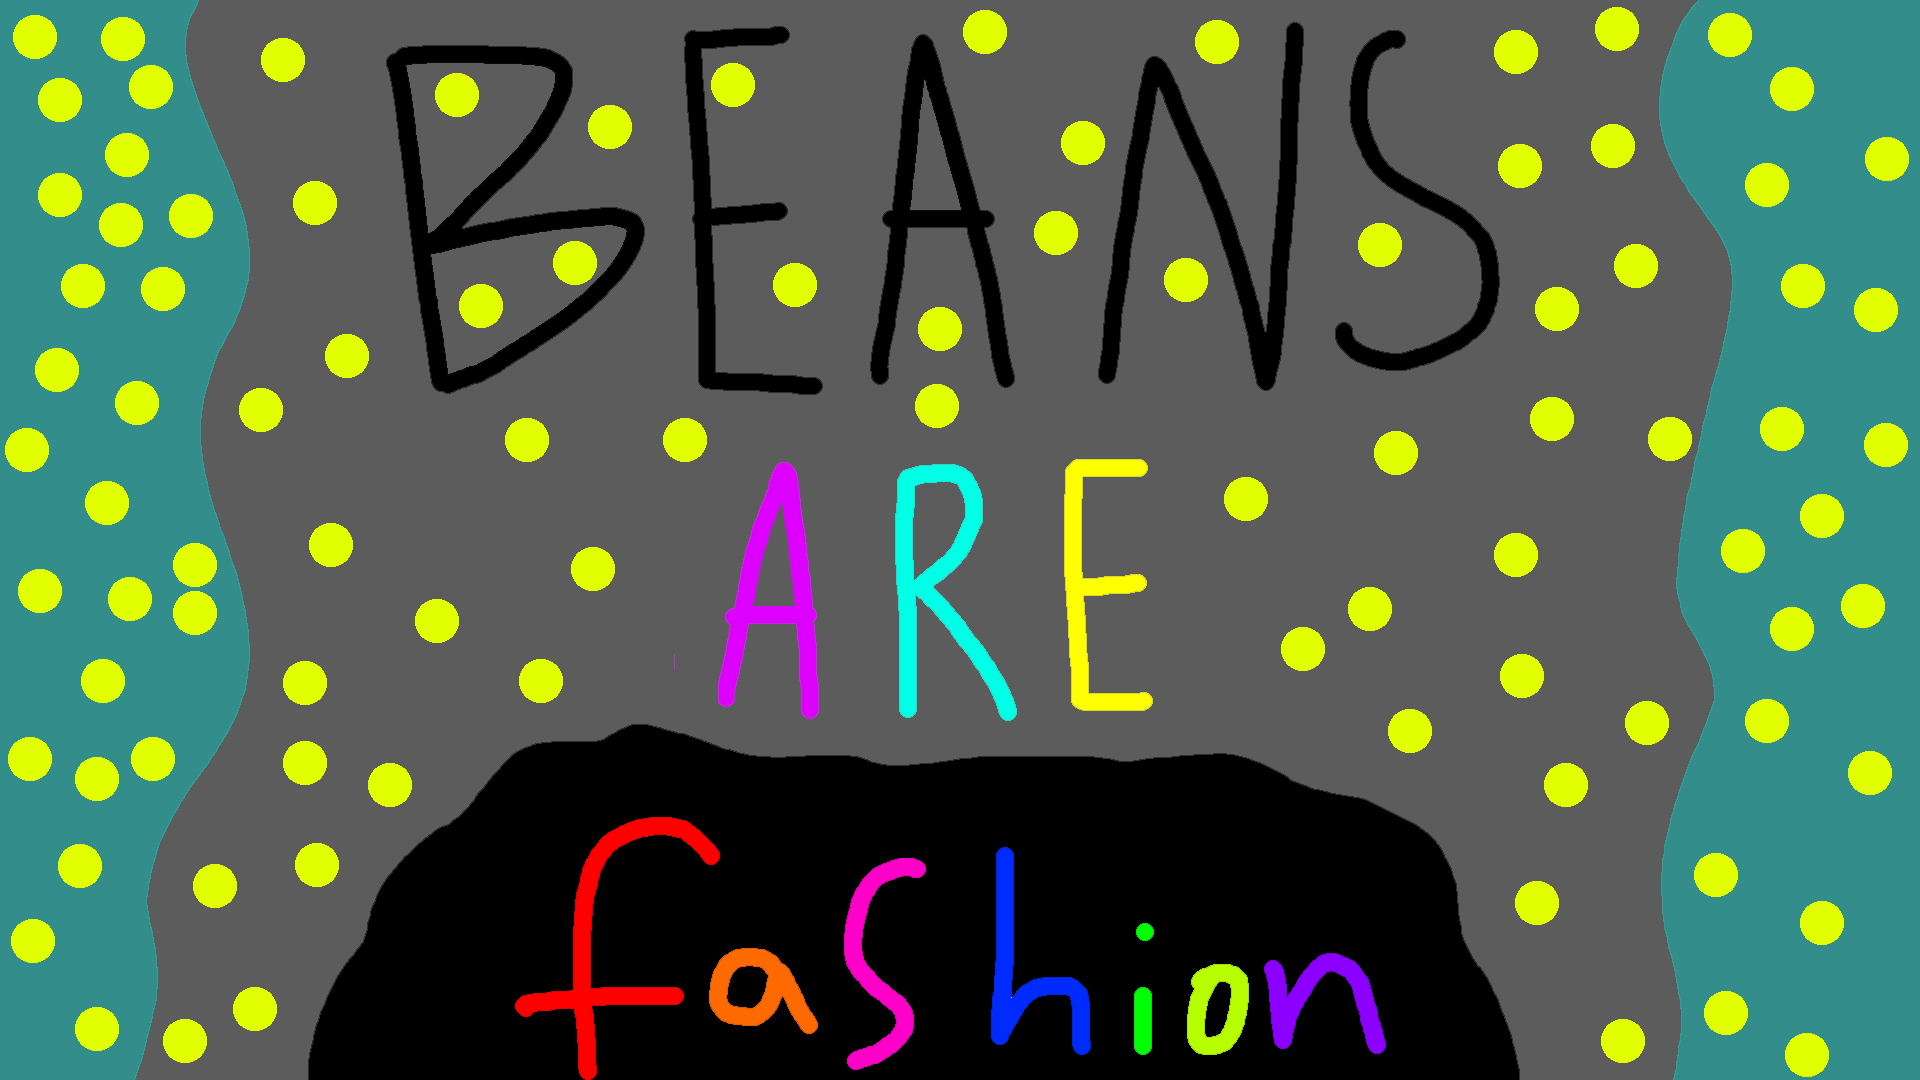 Beans are Fashion?